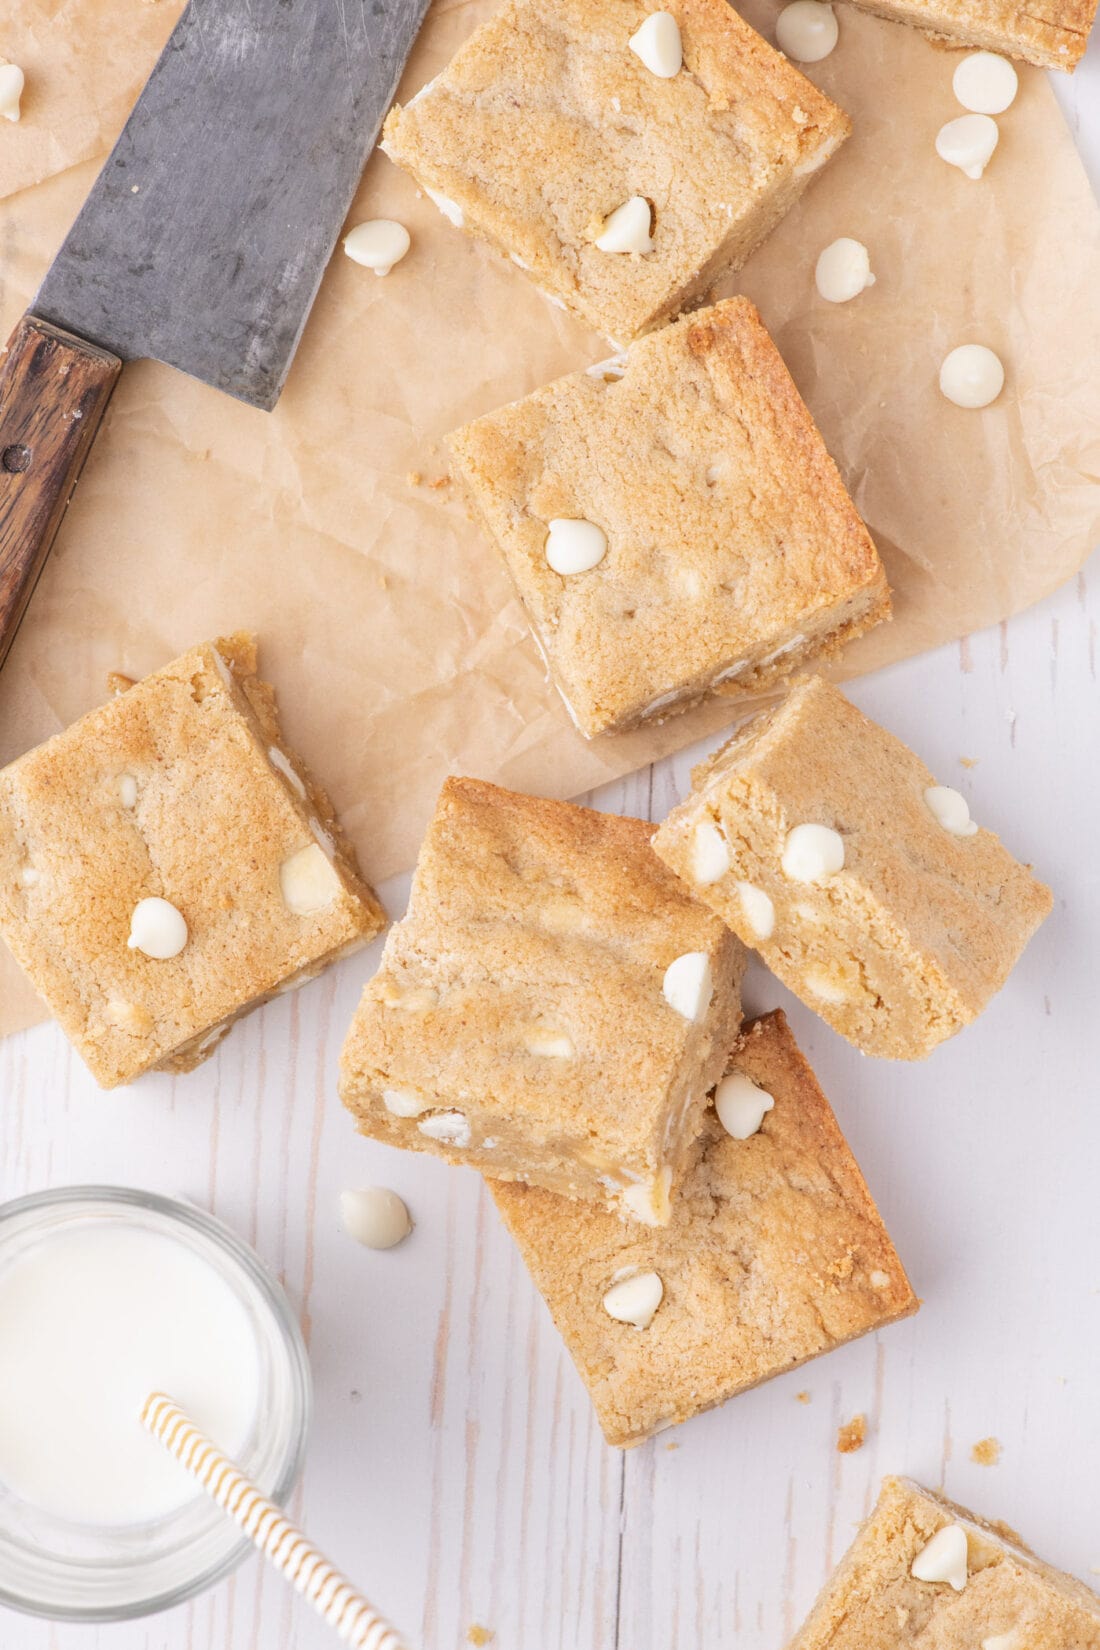 Blondies resting on parchment paper with a glass of milk